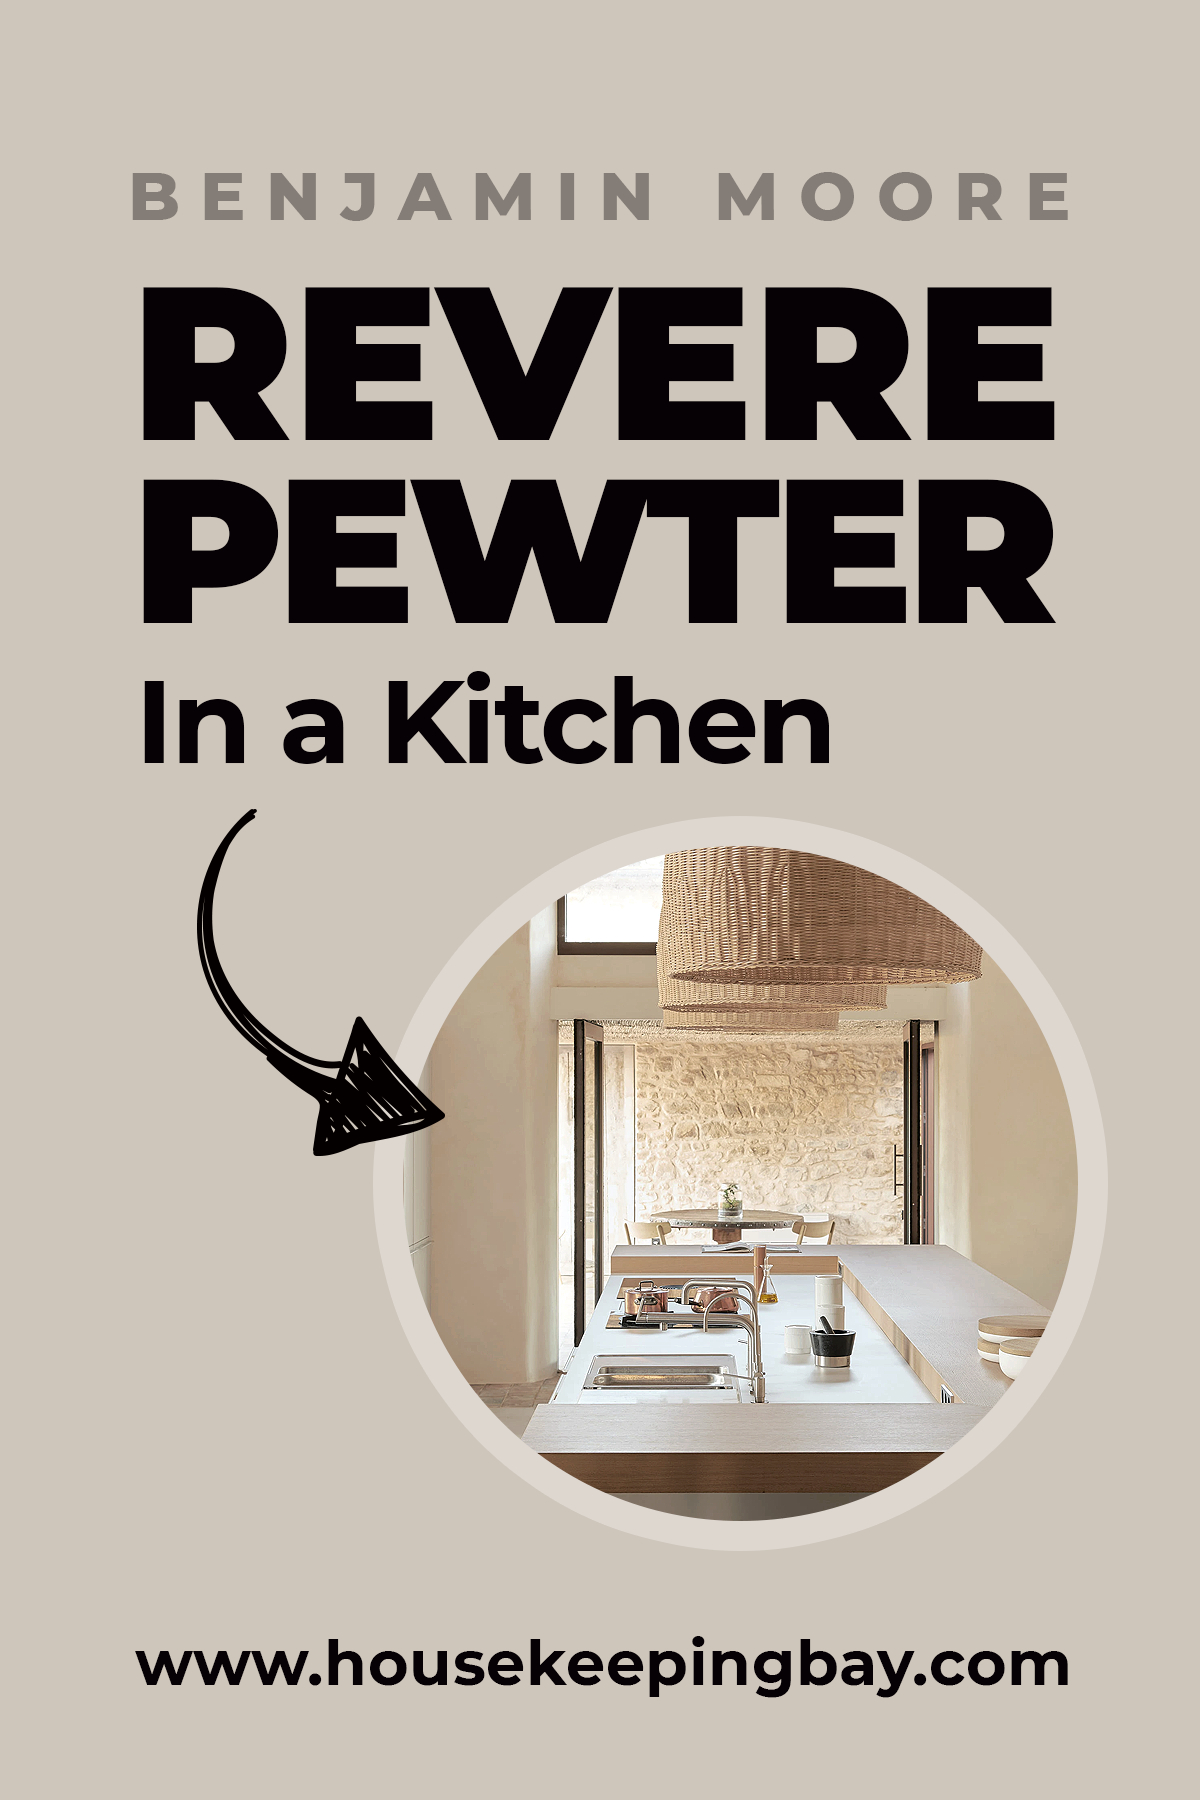 Revere Pewter In a Kitchen